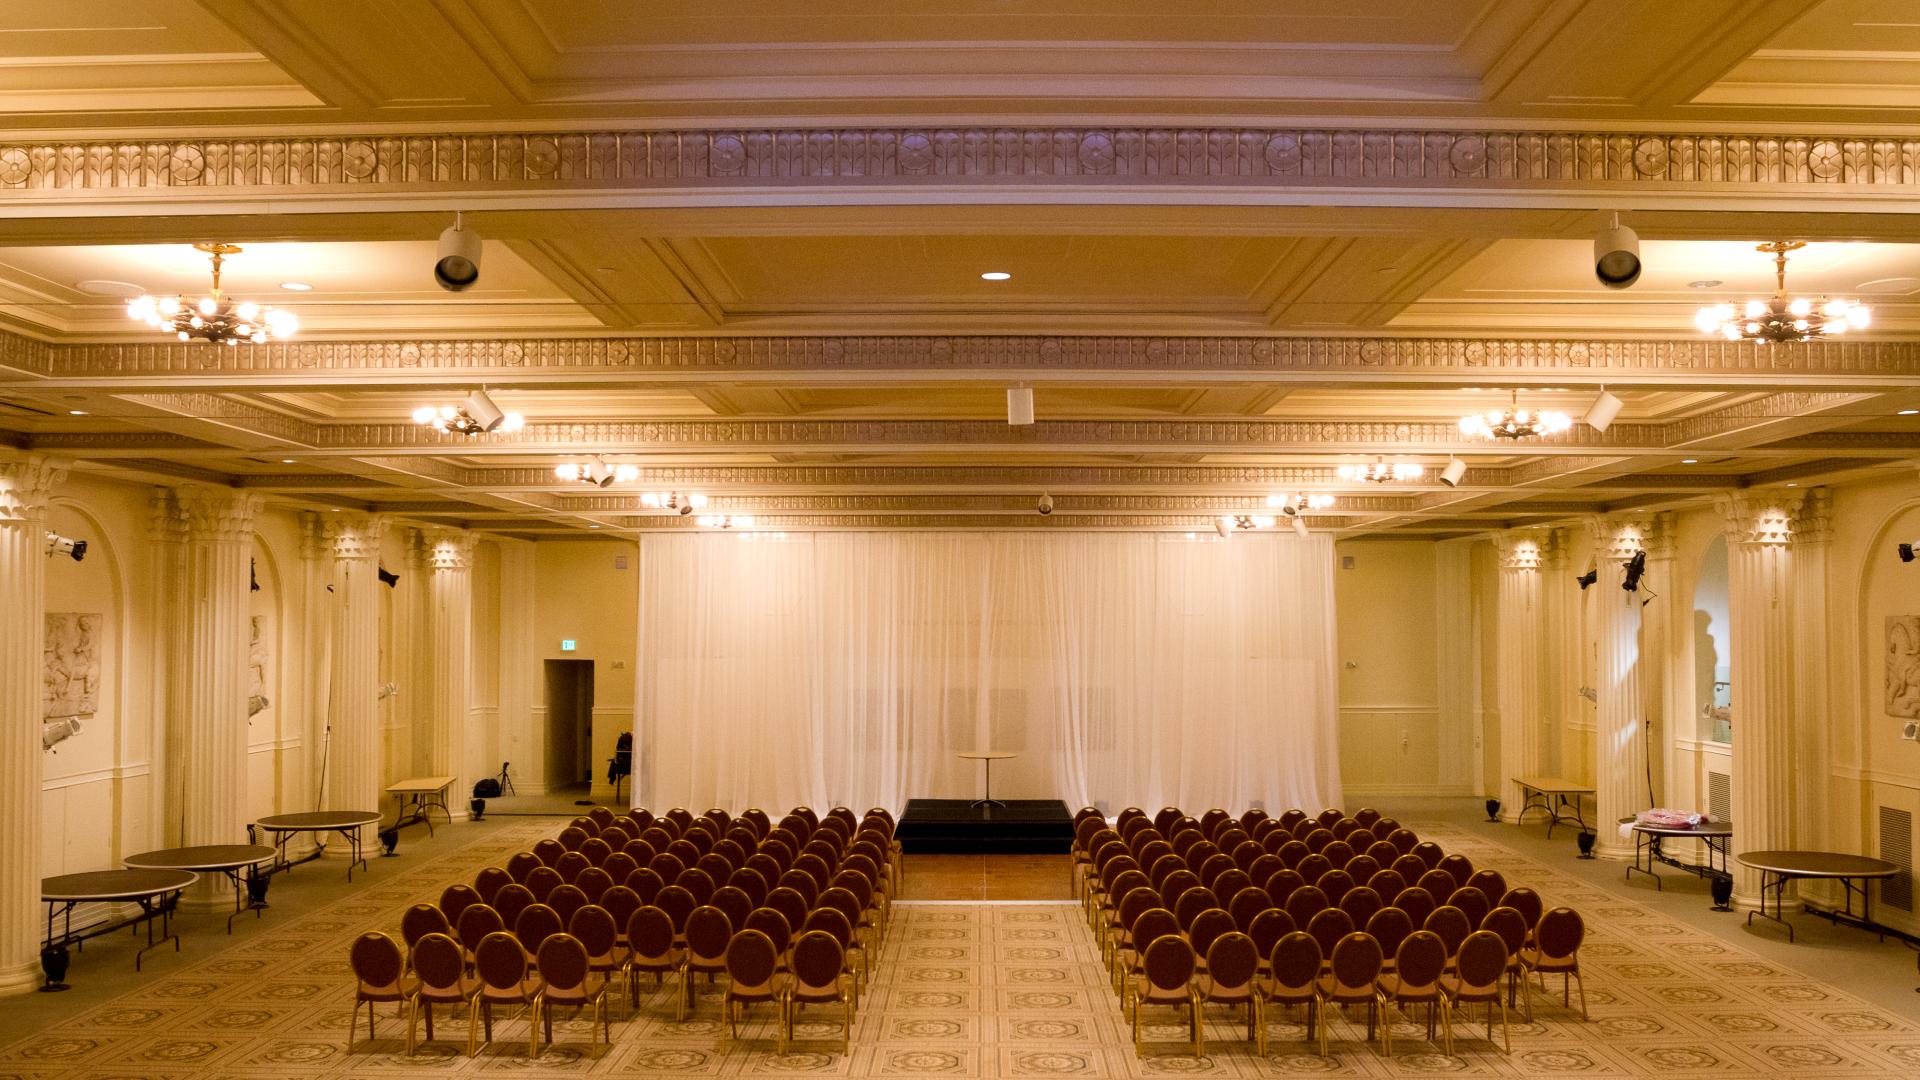 Award Ceremony Venues for Rent in Toronto, ON